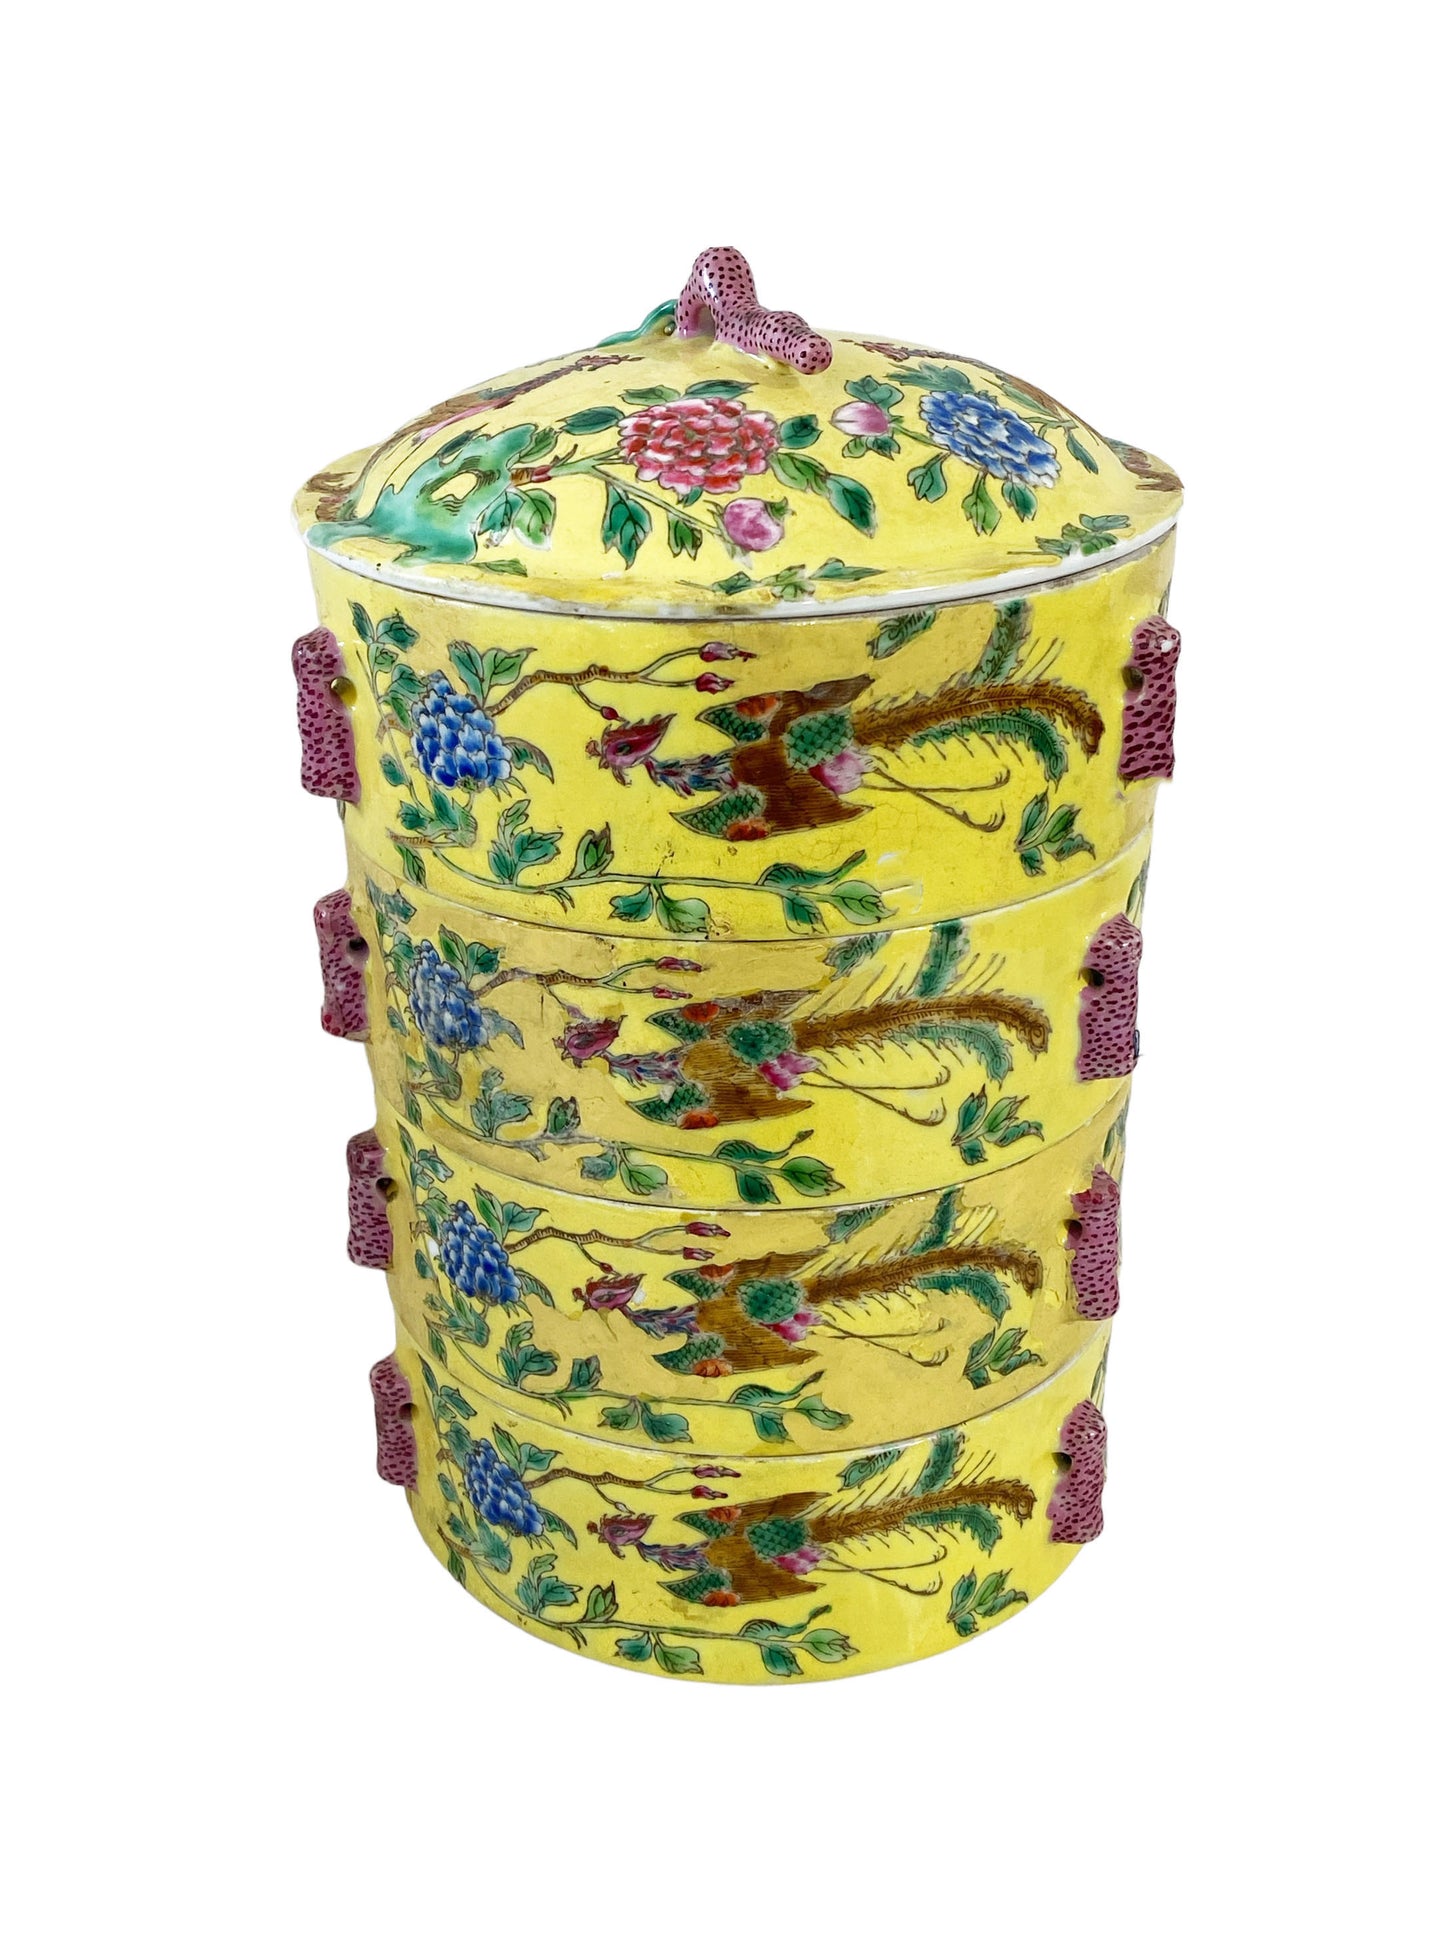 #7113 Old Chinoiserie Famille Jaune Porcelain Food Carrier Box , 5 Pieces 11" H